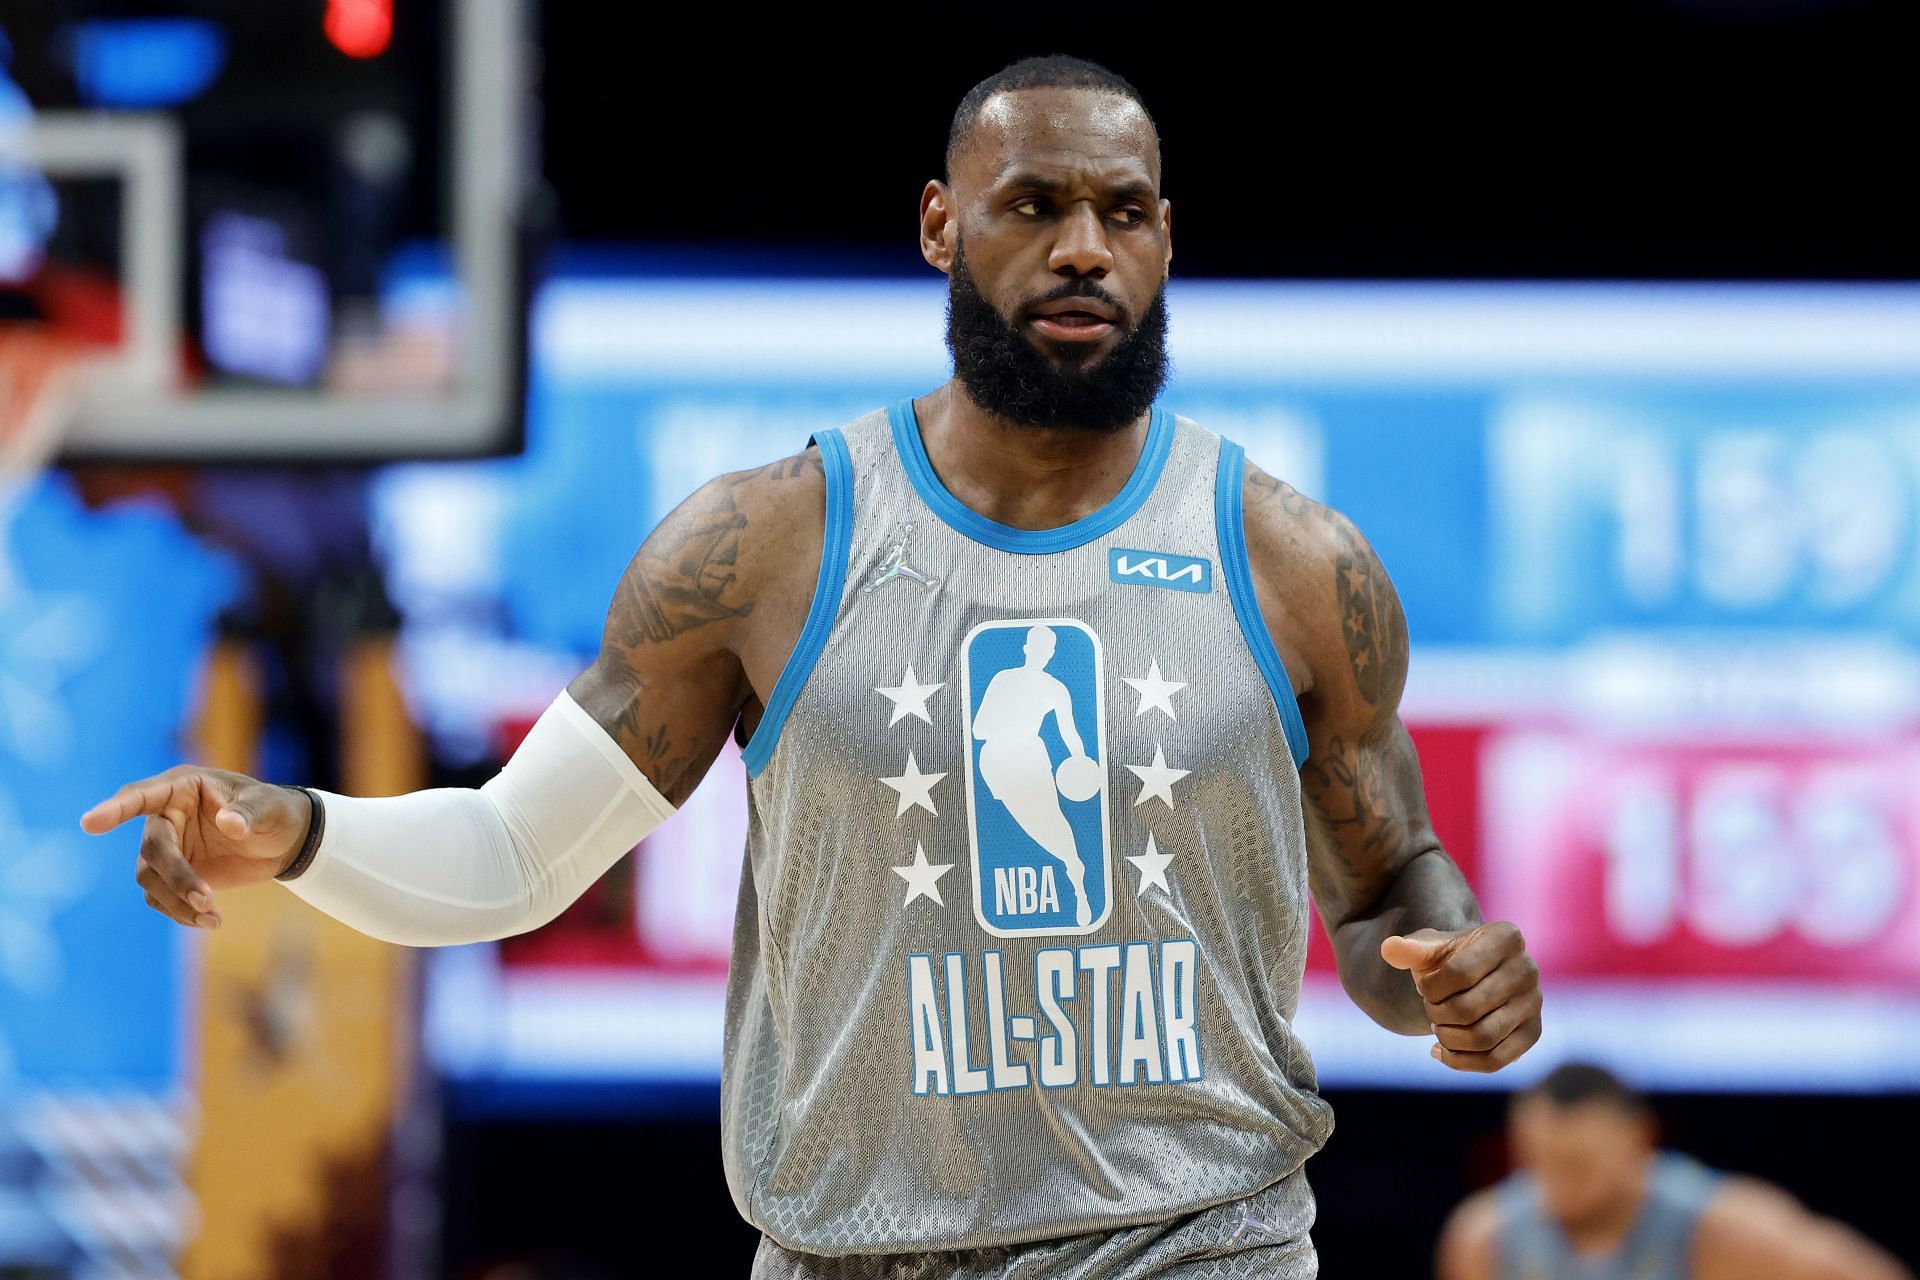 LeBron James at the All-Star Game